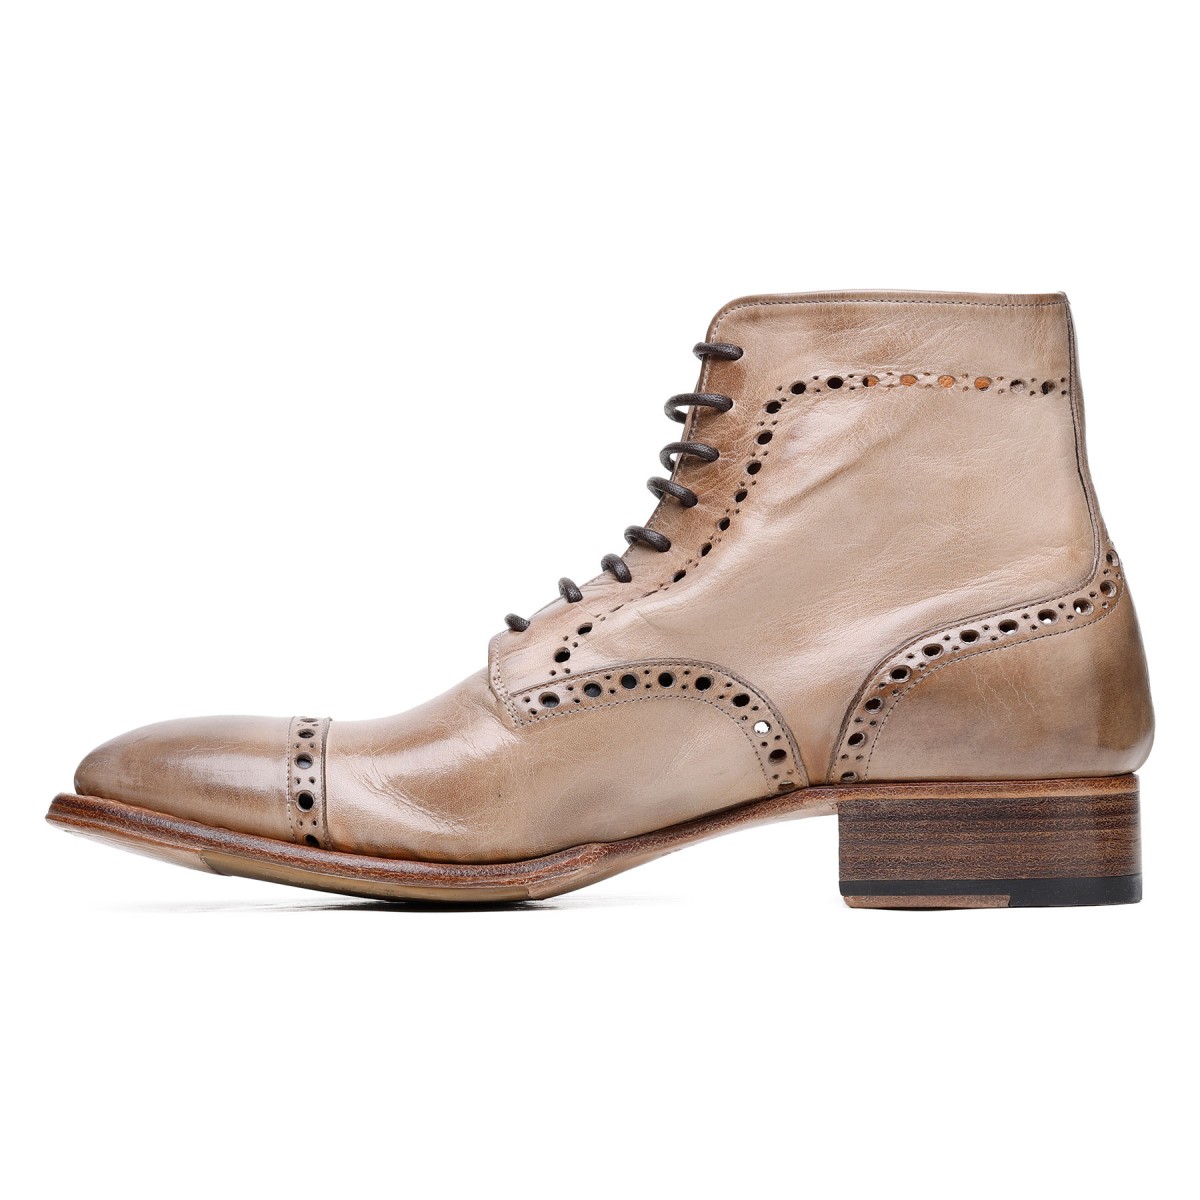 Clay-hue leather Brogue booties